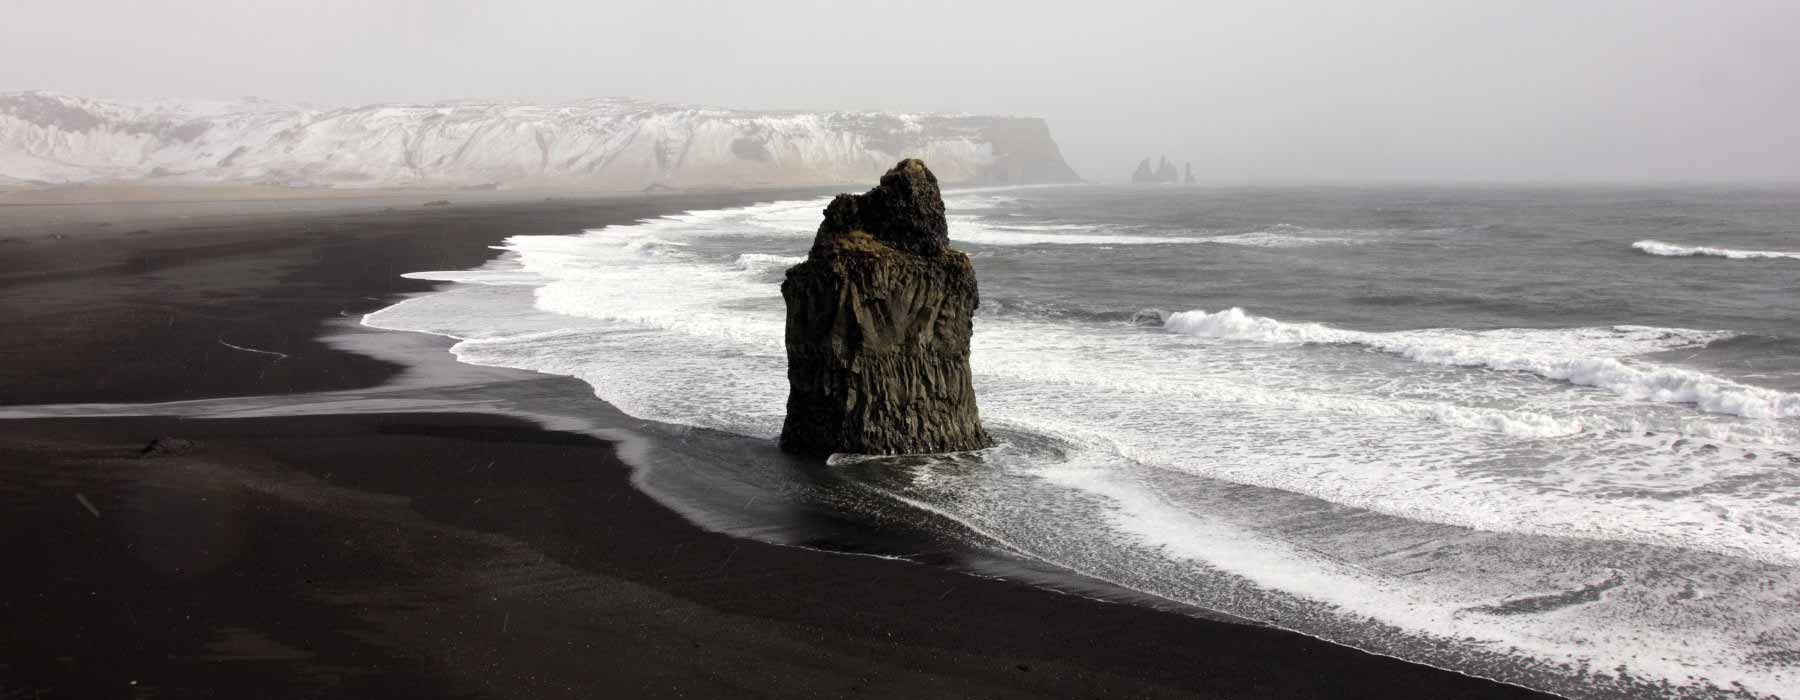 Iceland<br class="hidden-md hidden-lg" /> Travelling with Teenagers